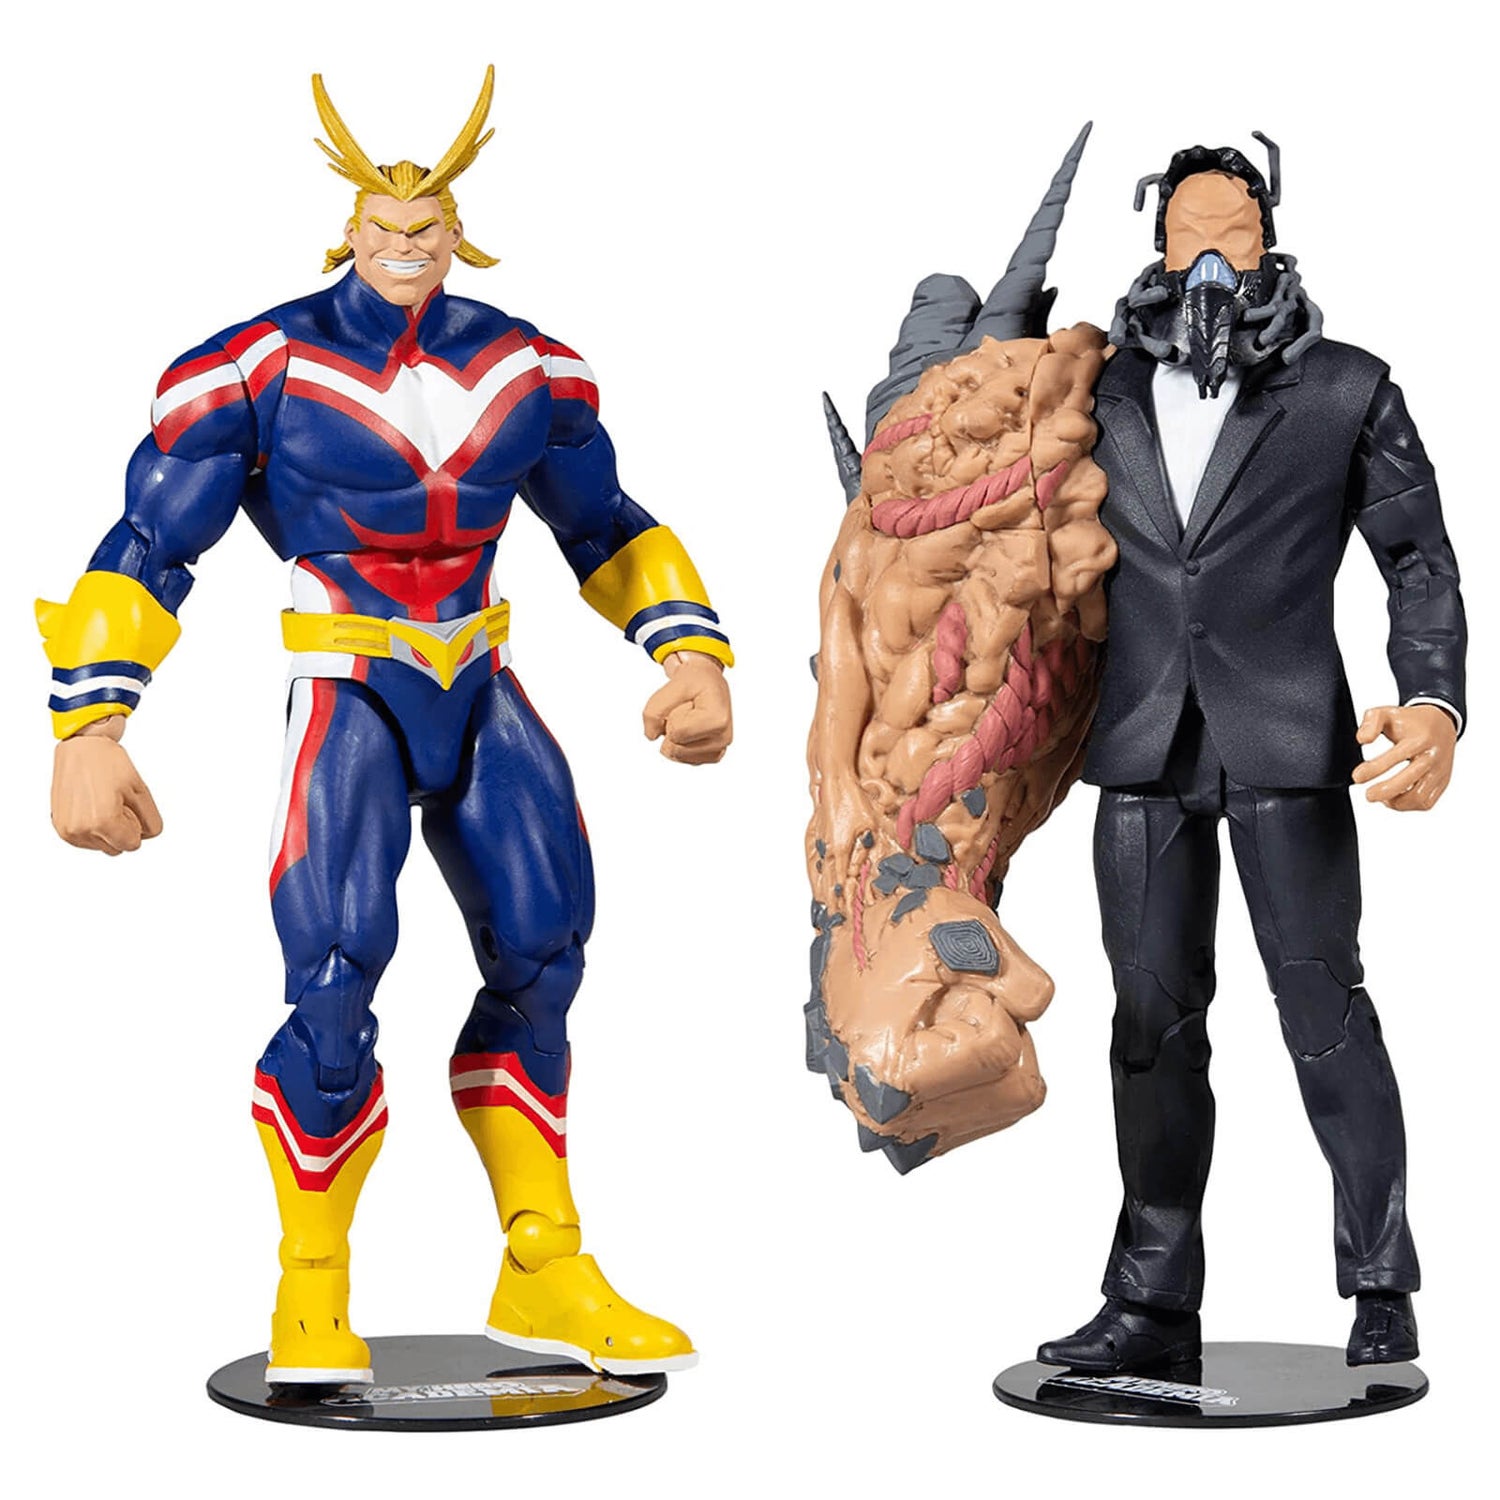 McFarlane My Hero Academia 7" Action Figure 2-Pack - All Might Vs. All For One